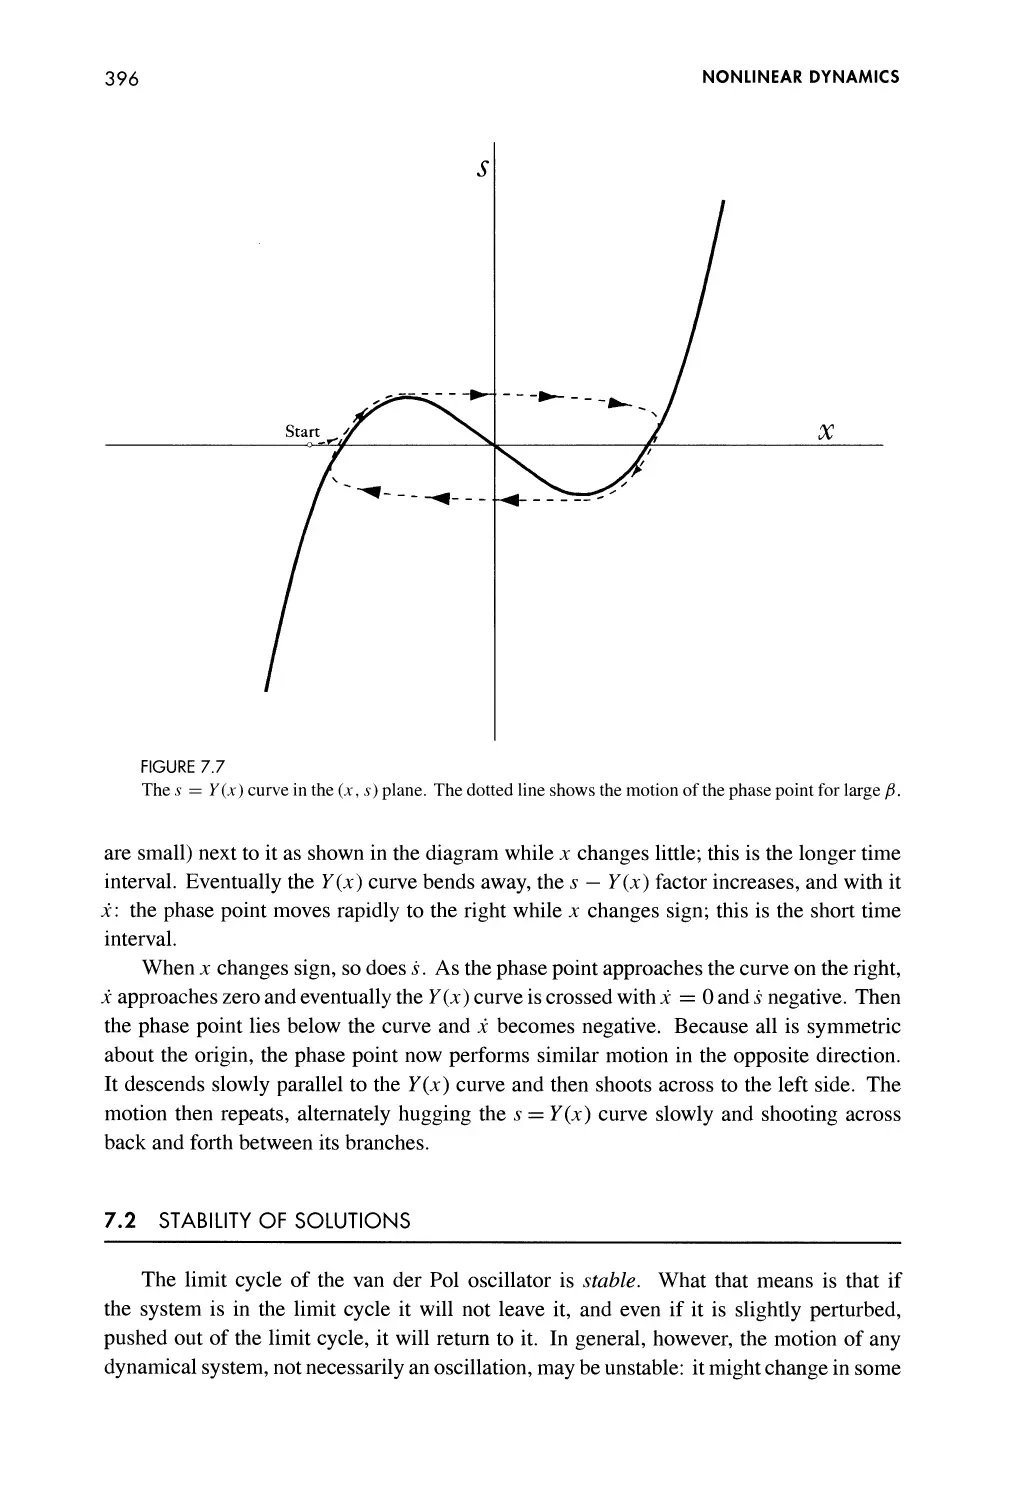 7.2 Stability of Solutions